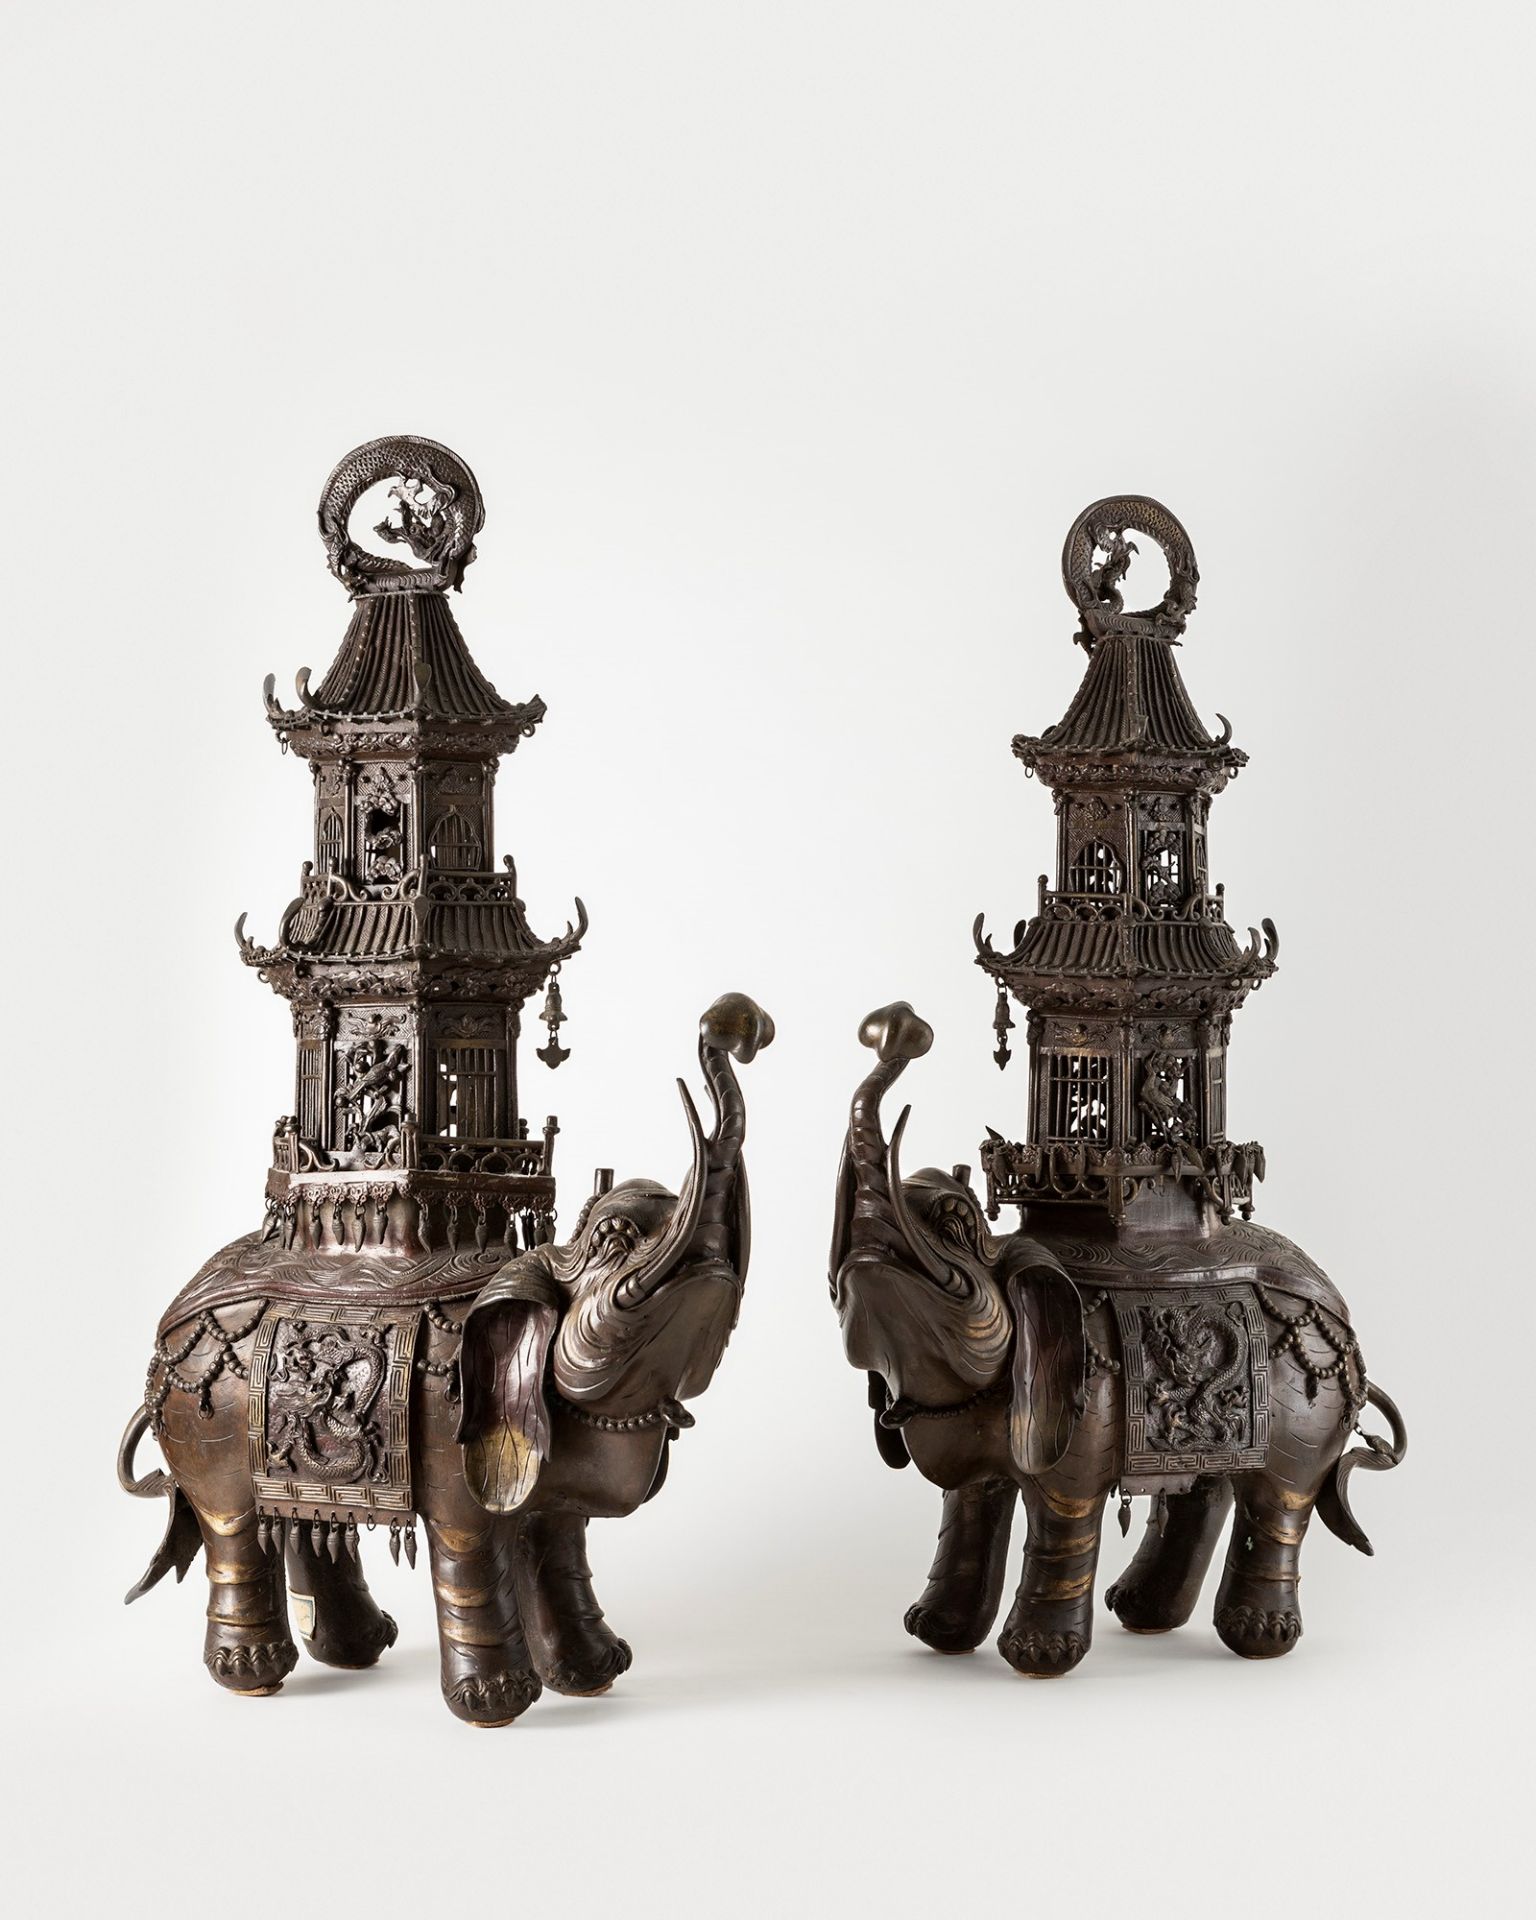 A pair of large bronze elephant-shaped censers. China, 19/20th century